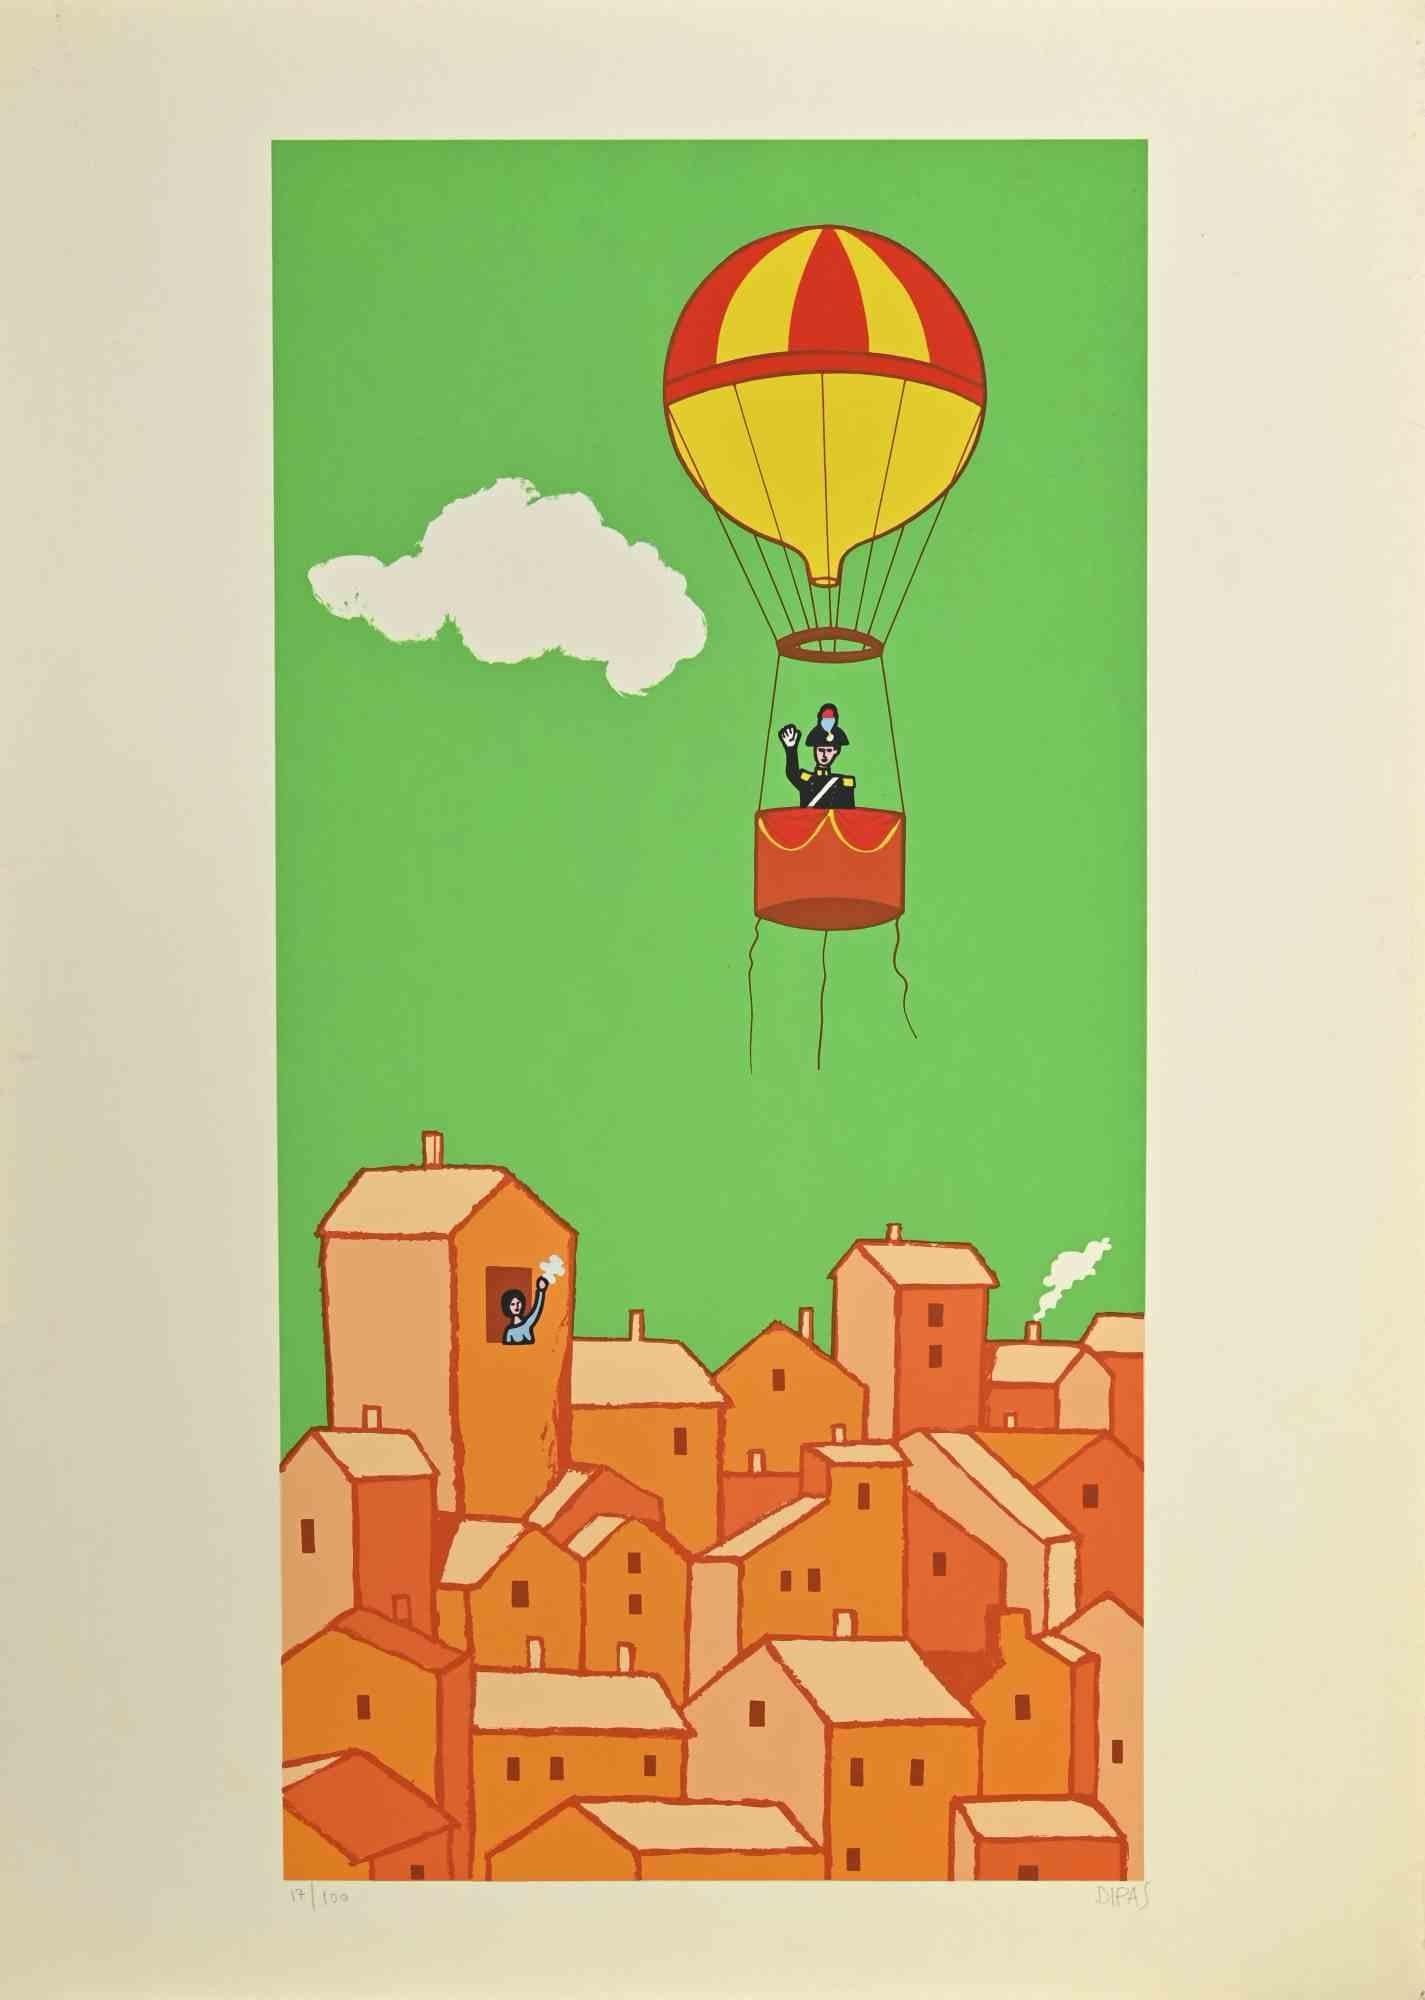 The greeting is a contemporary artwork realized by the artist Dipas in the 1970s.

Mixed colored screen print.

Hand signed on the lower right margin.

Numbered on the lower left margin.

Edition of 17/100.

Yellowing paper.